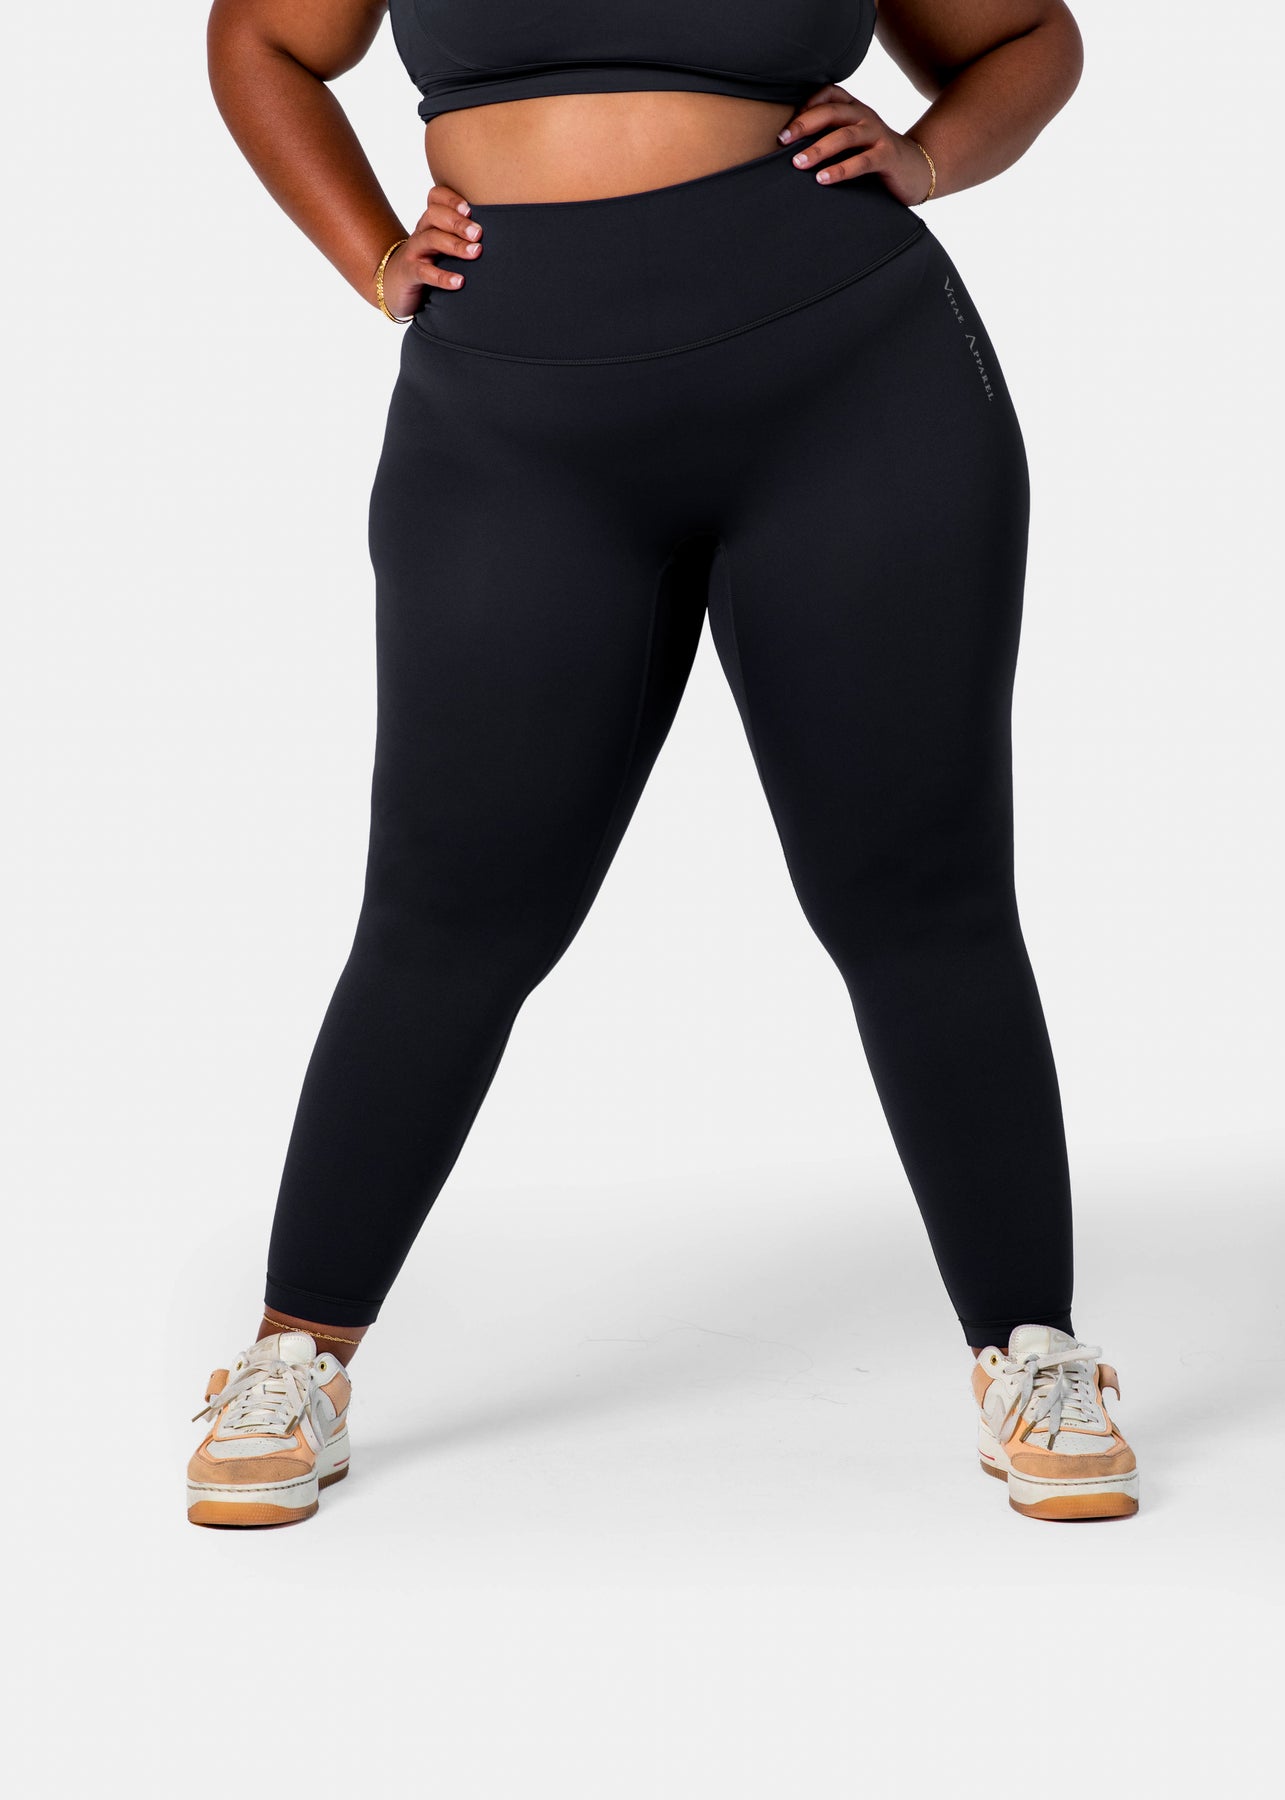  Dream Collection Workout Leggings For Women High Waist  Seamless Scrunch Athletic Running Gym Fitness Active Pants Asphalt Grey M